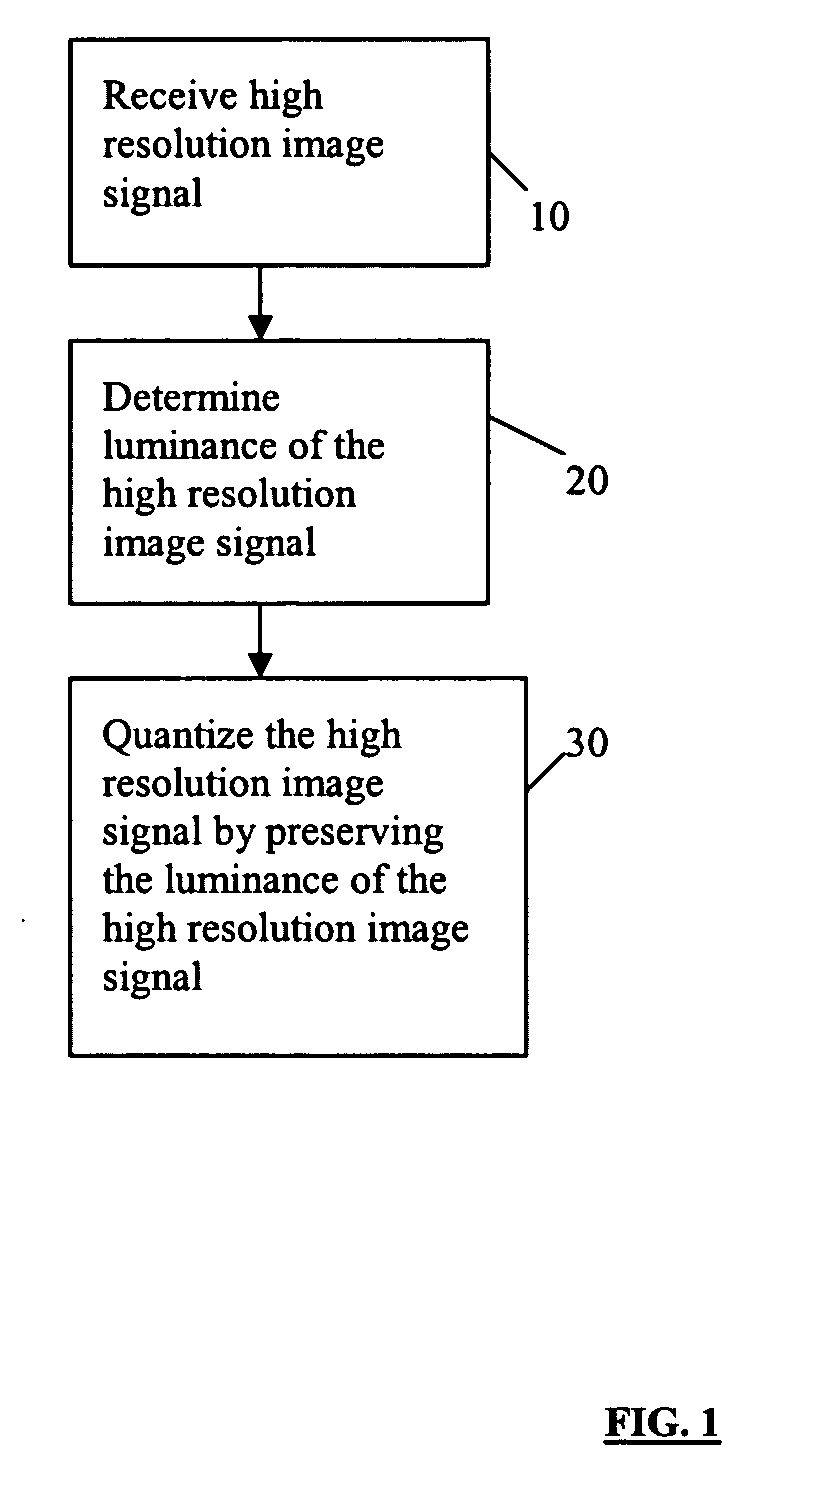 Luminance preserving color quantization in RGB color space